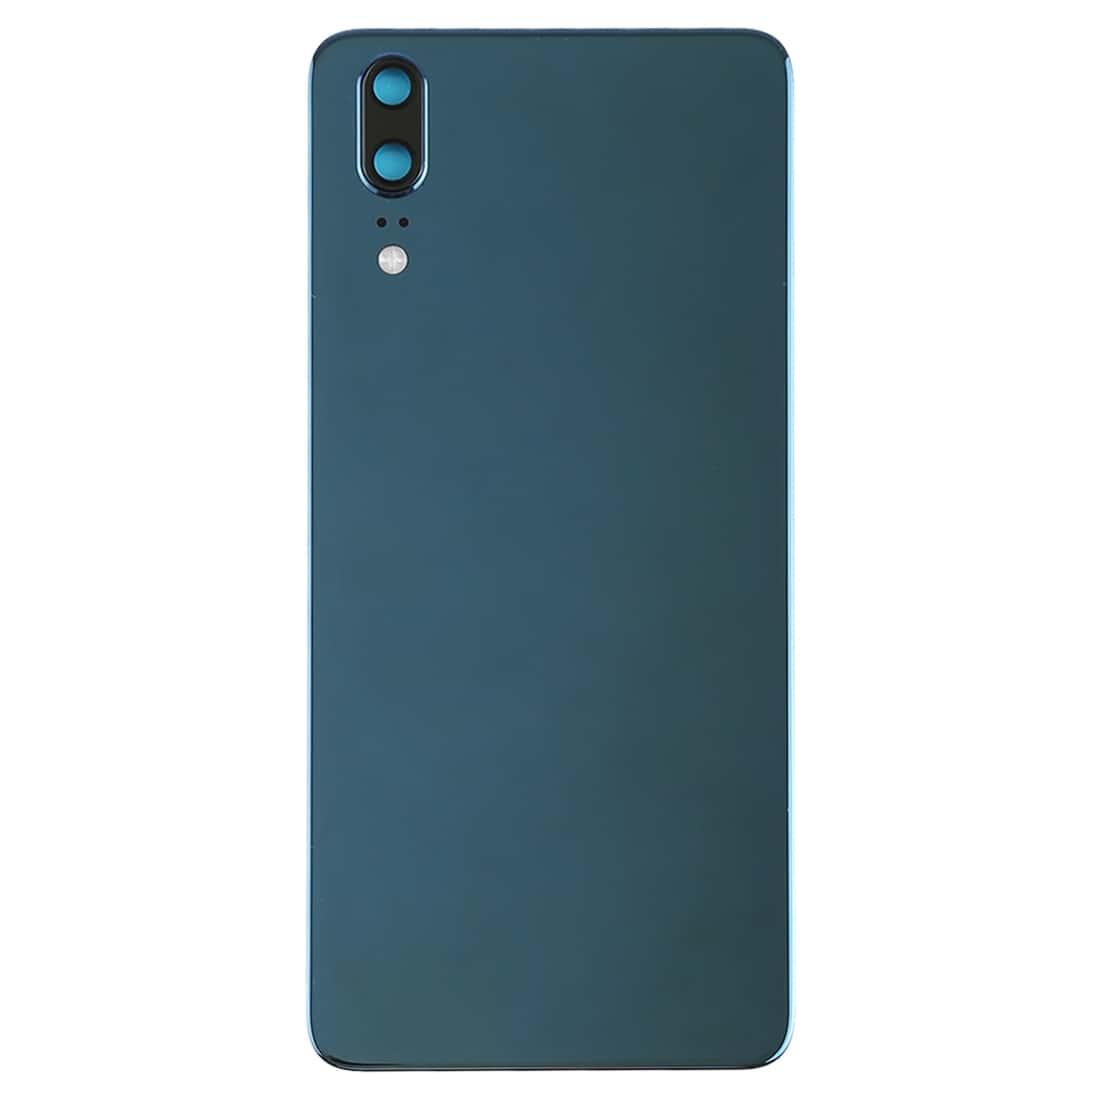 Back Panel Housing Body for Huawei P20 Blue with Camera Lens